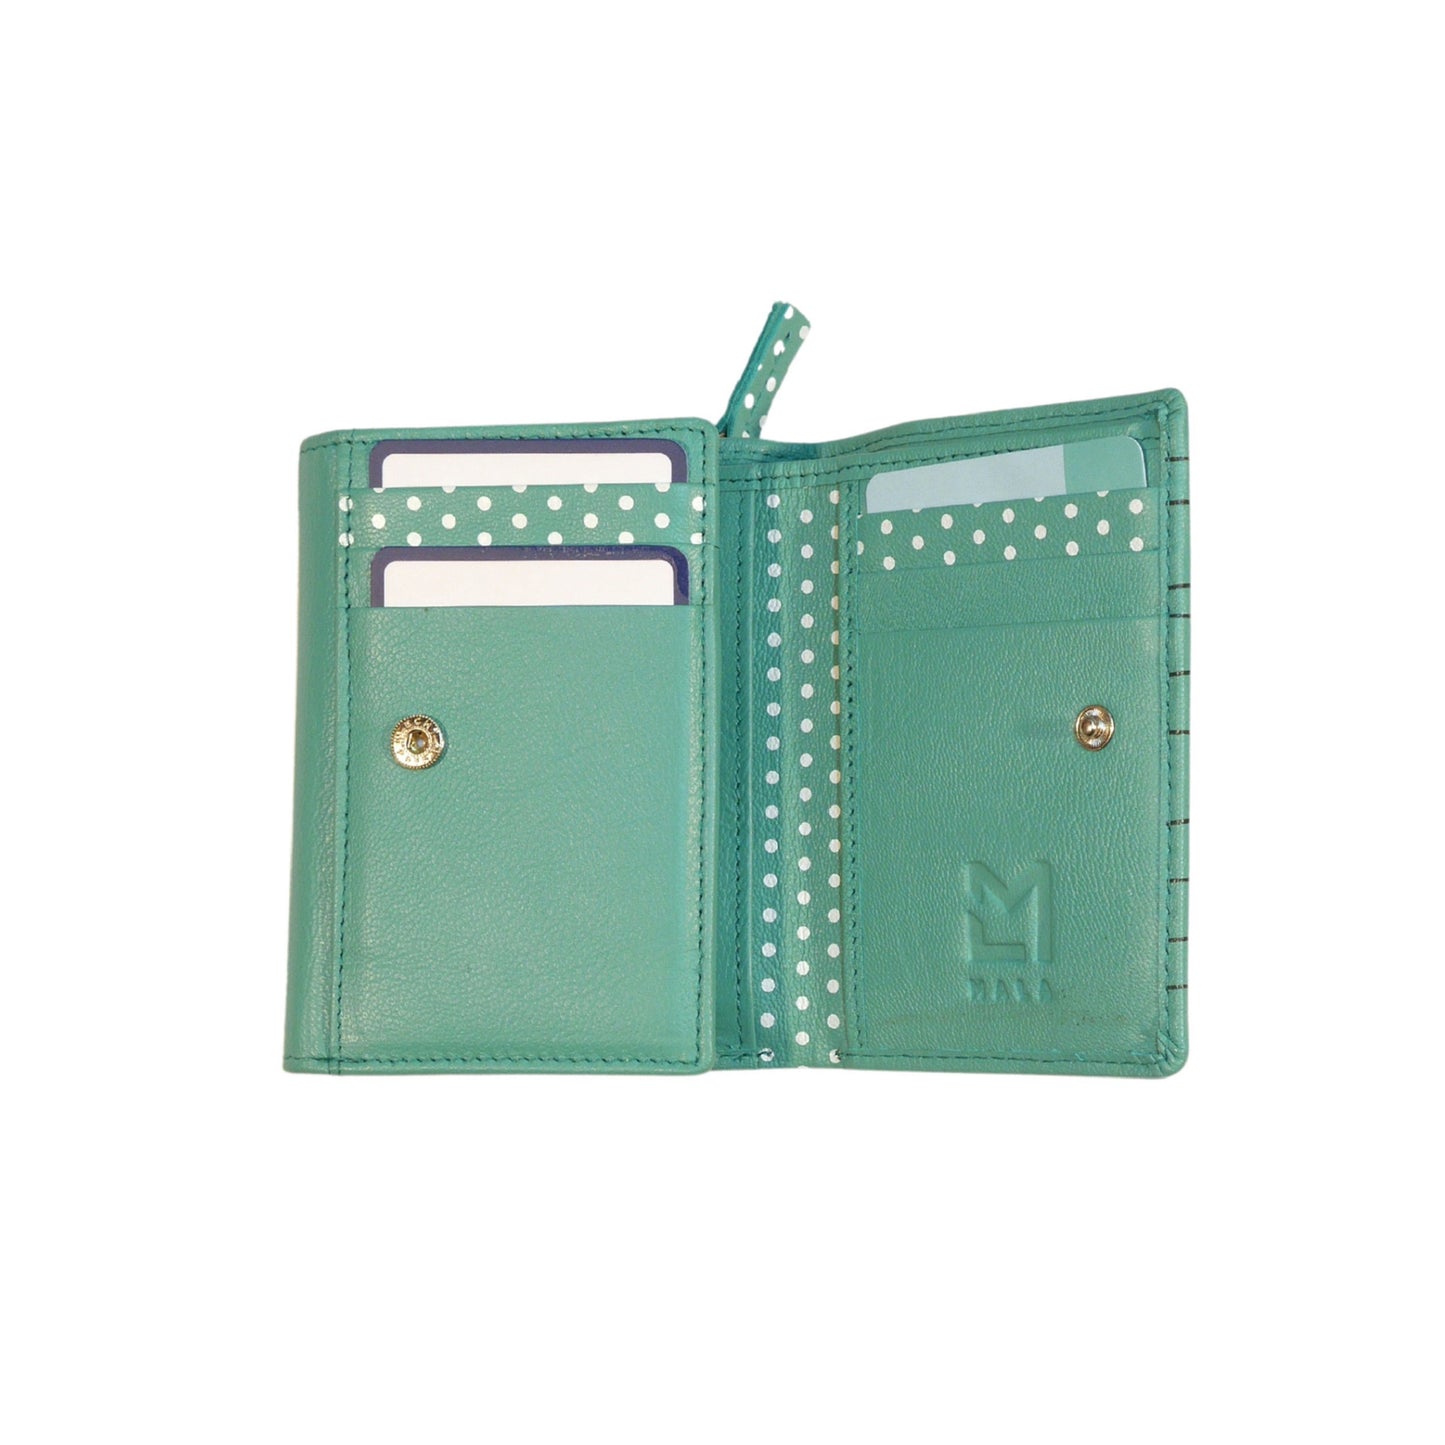 Moonflower Tri-Fold Leather Bee Purse - Turquoise